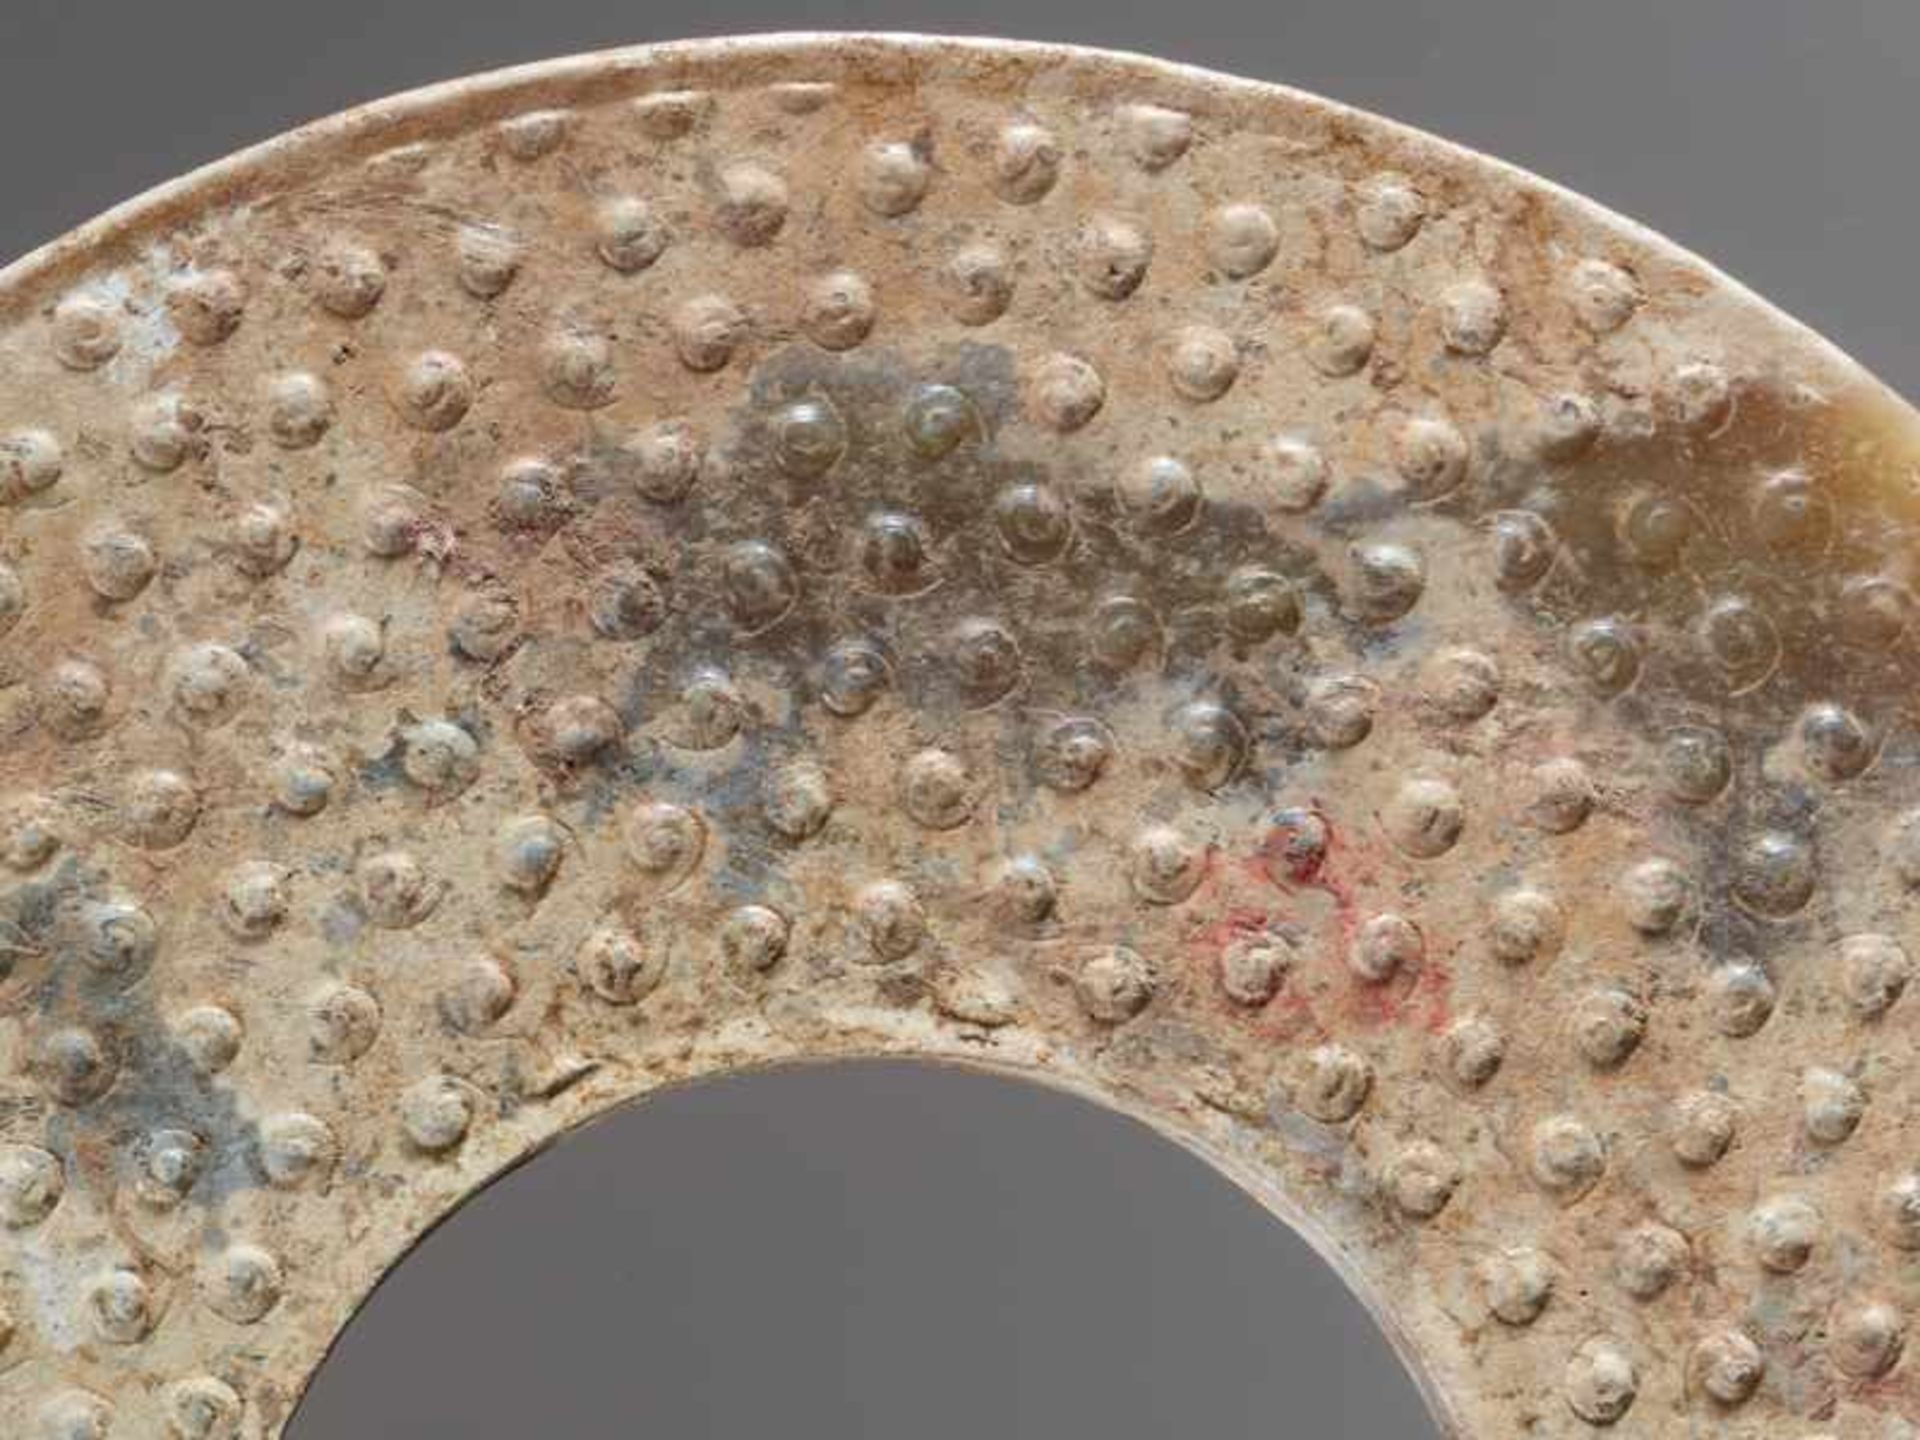 A STRONGLY CALCIFIED BI DISC WITH SCROLLS IN RELIEF Jade. China, Han dynasty, 3rd - 2nd century BC - Image 5 of 6